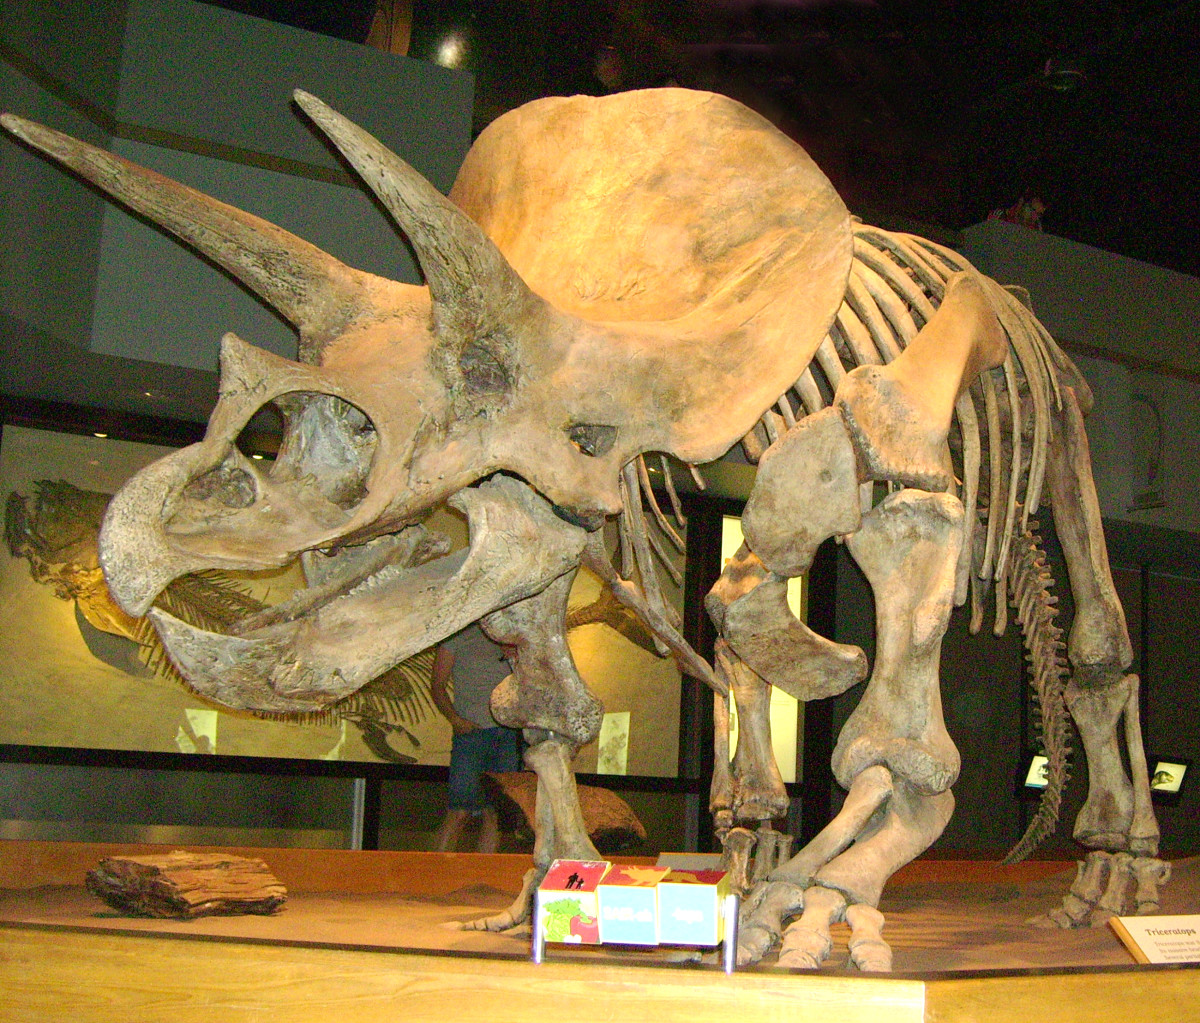 Triceratops were named because of their three horns. 